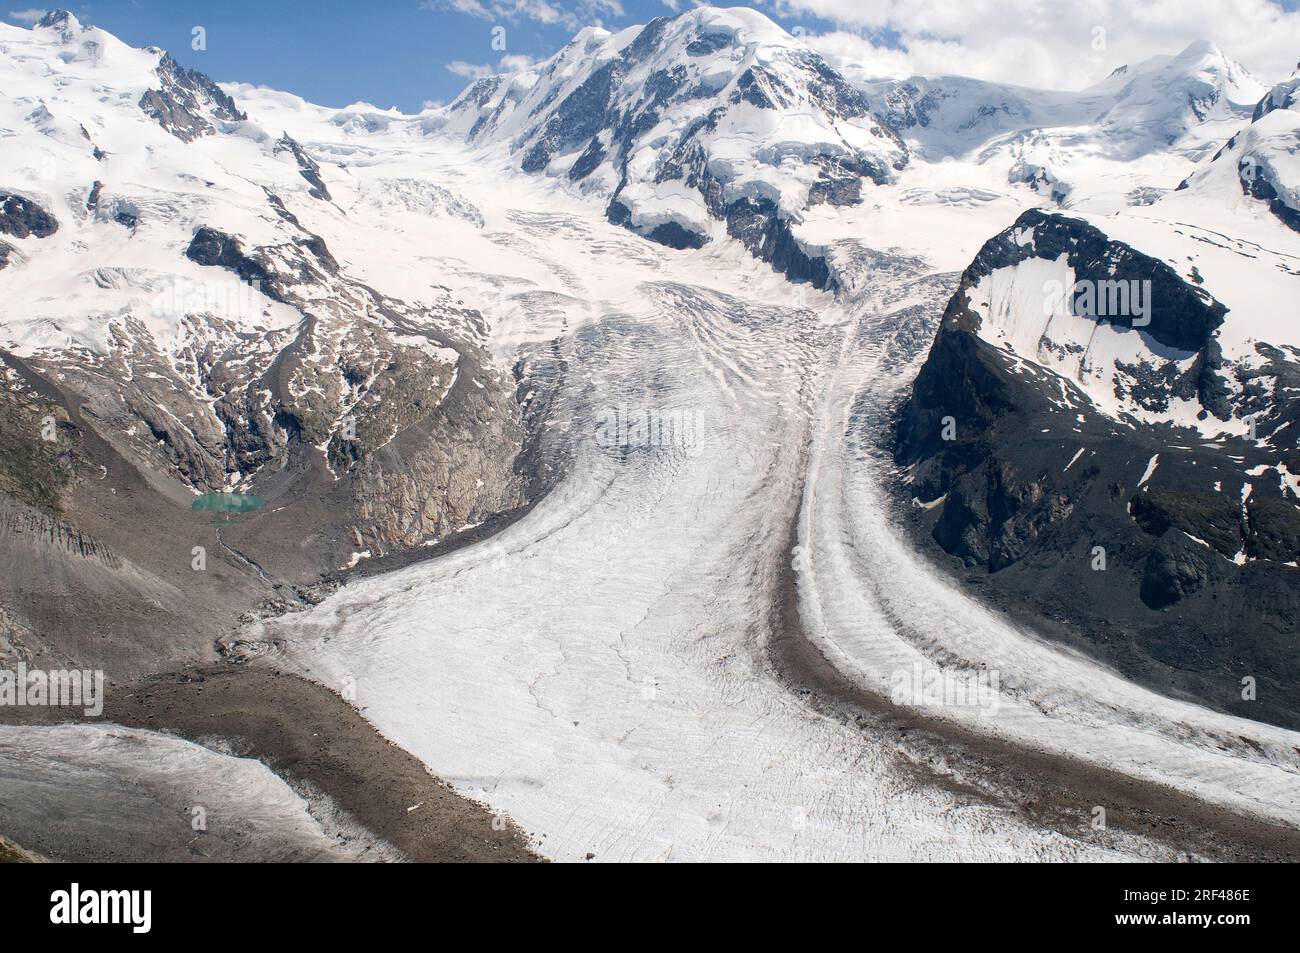 Gornergrat glacier with main and secondary glaciers, cirques, hanging valleys, aretes, horns, crevases, moraines and glacier lake. Alps, Switzerland. Stock Photo